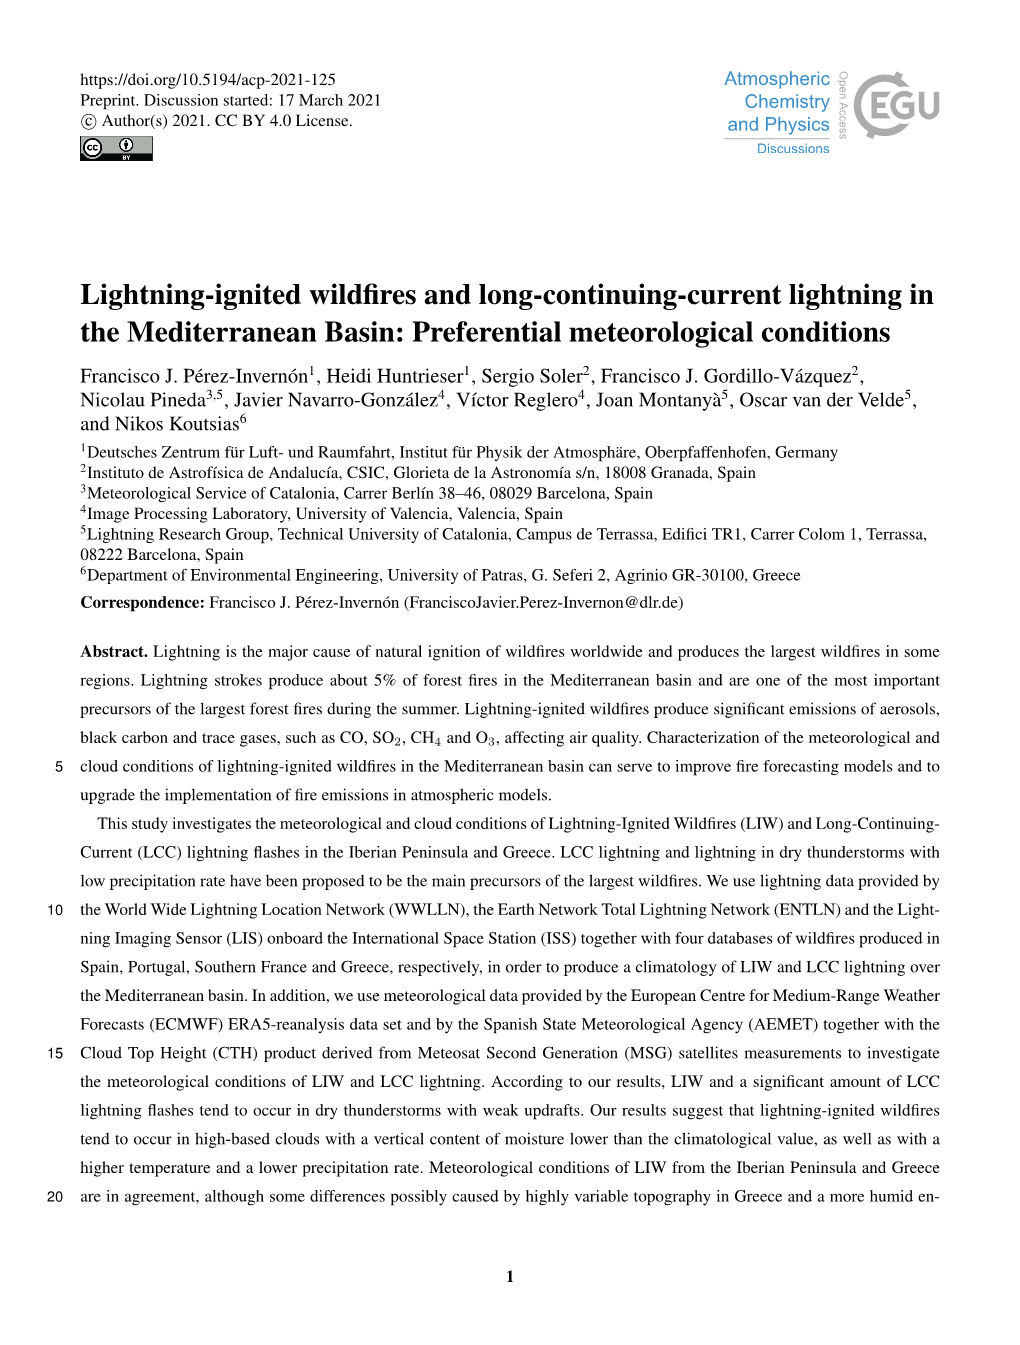 Lightning-Ignited Wildfires and Long-Continuing-Current Lightning in the Mediterranean Basin